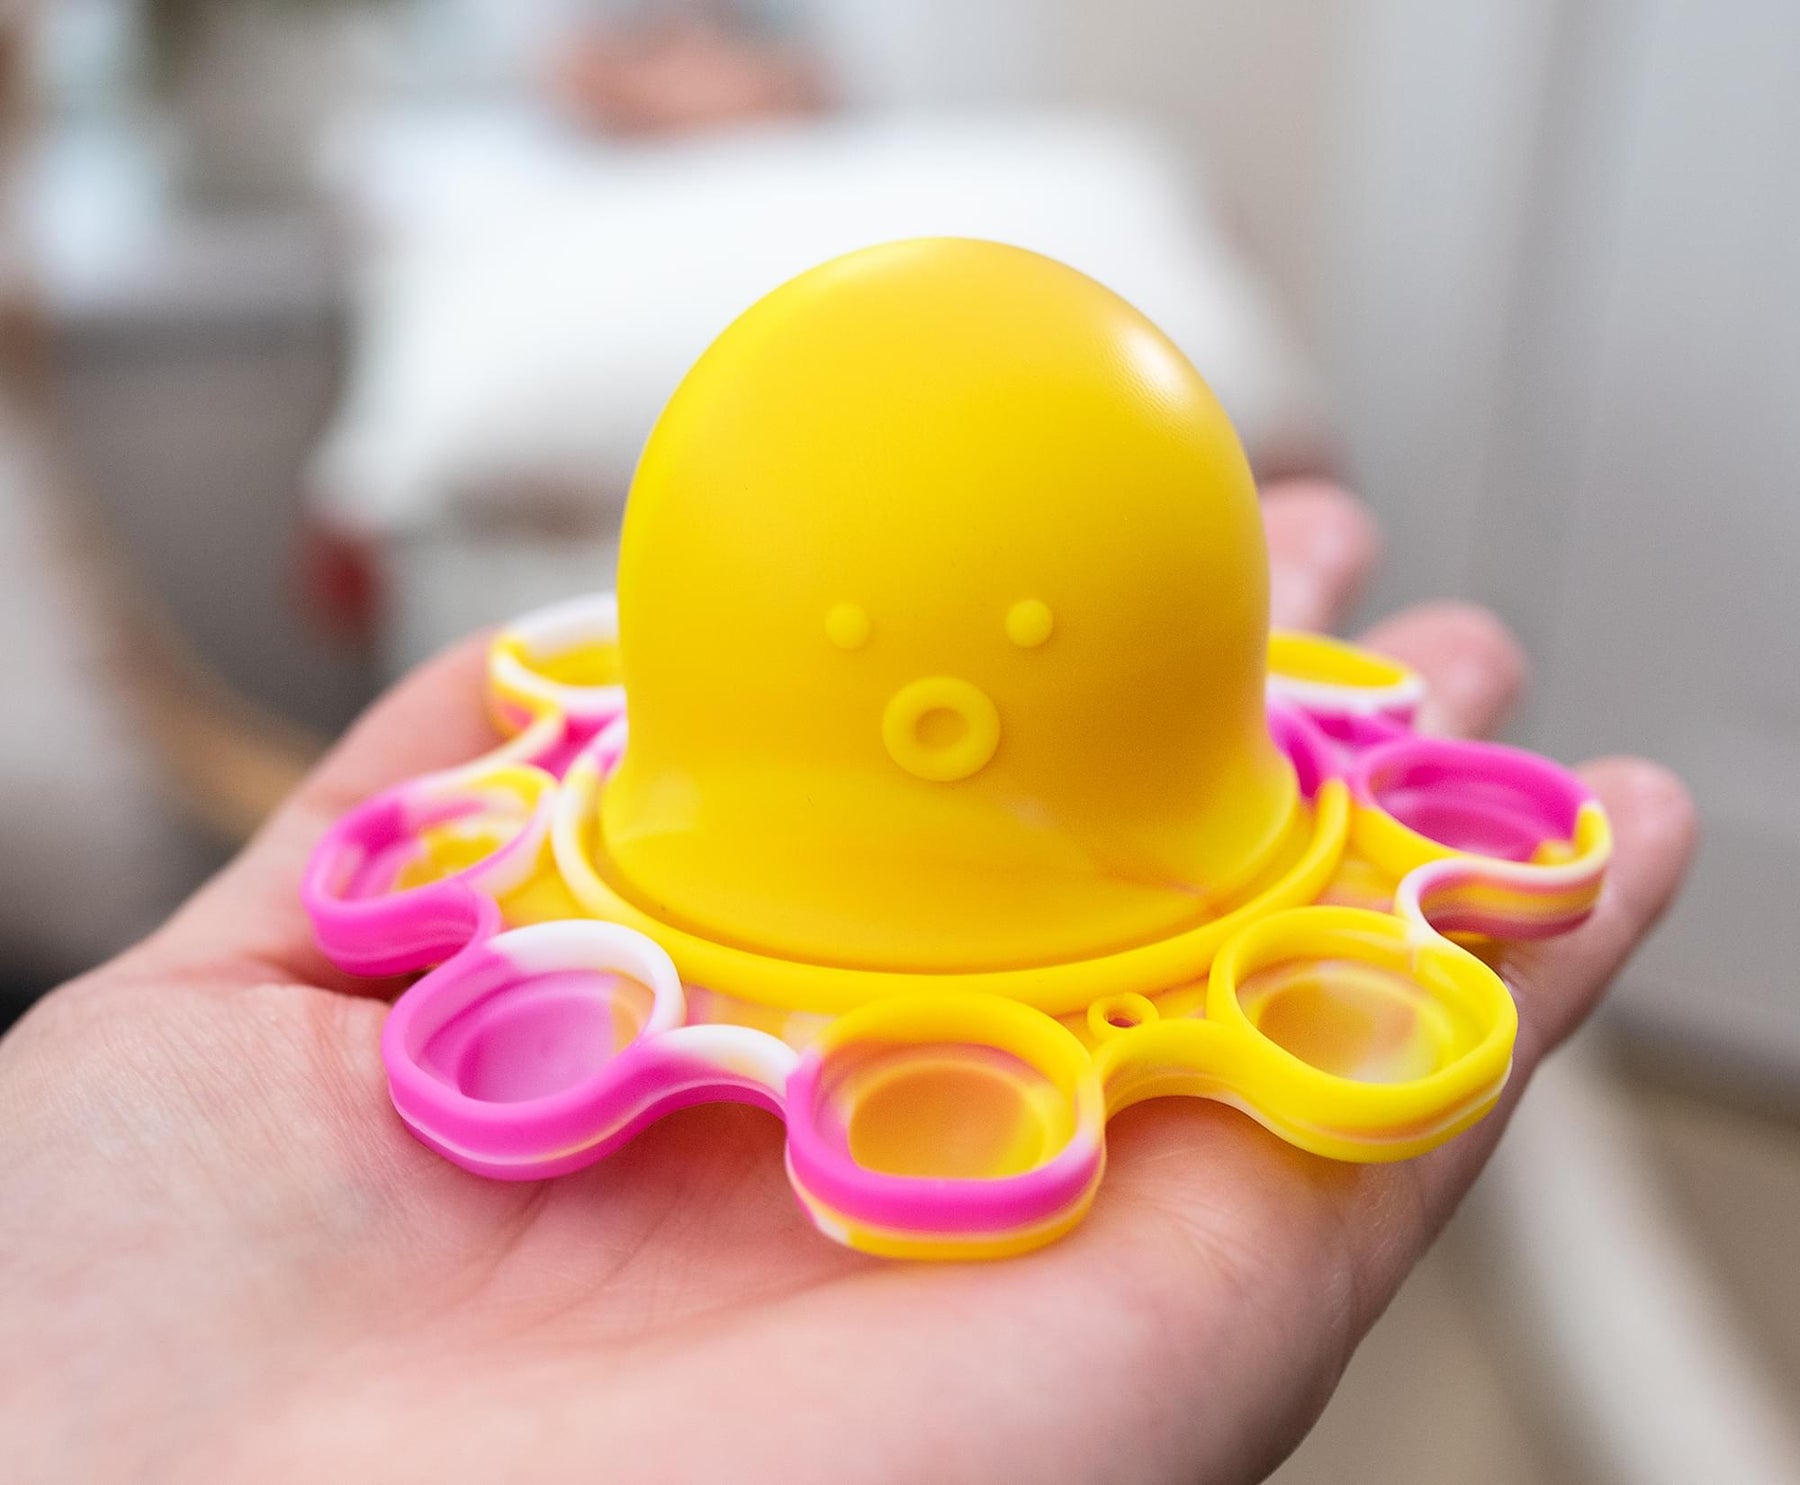 Pop Fidget Toy Yellow & Pink Octopus 8-Button Silicone Bubble Popping Game